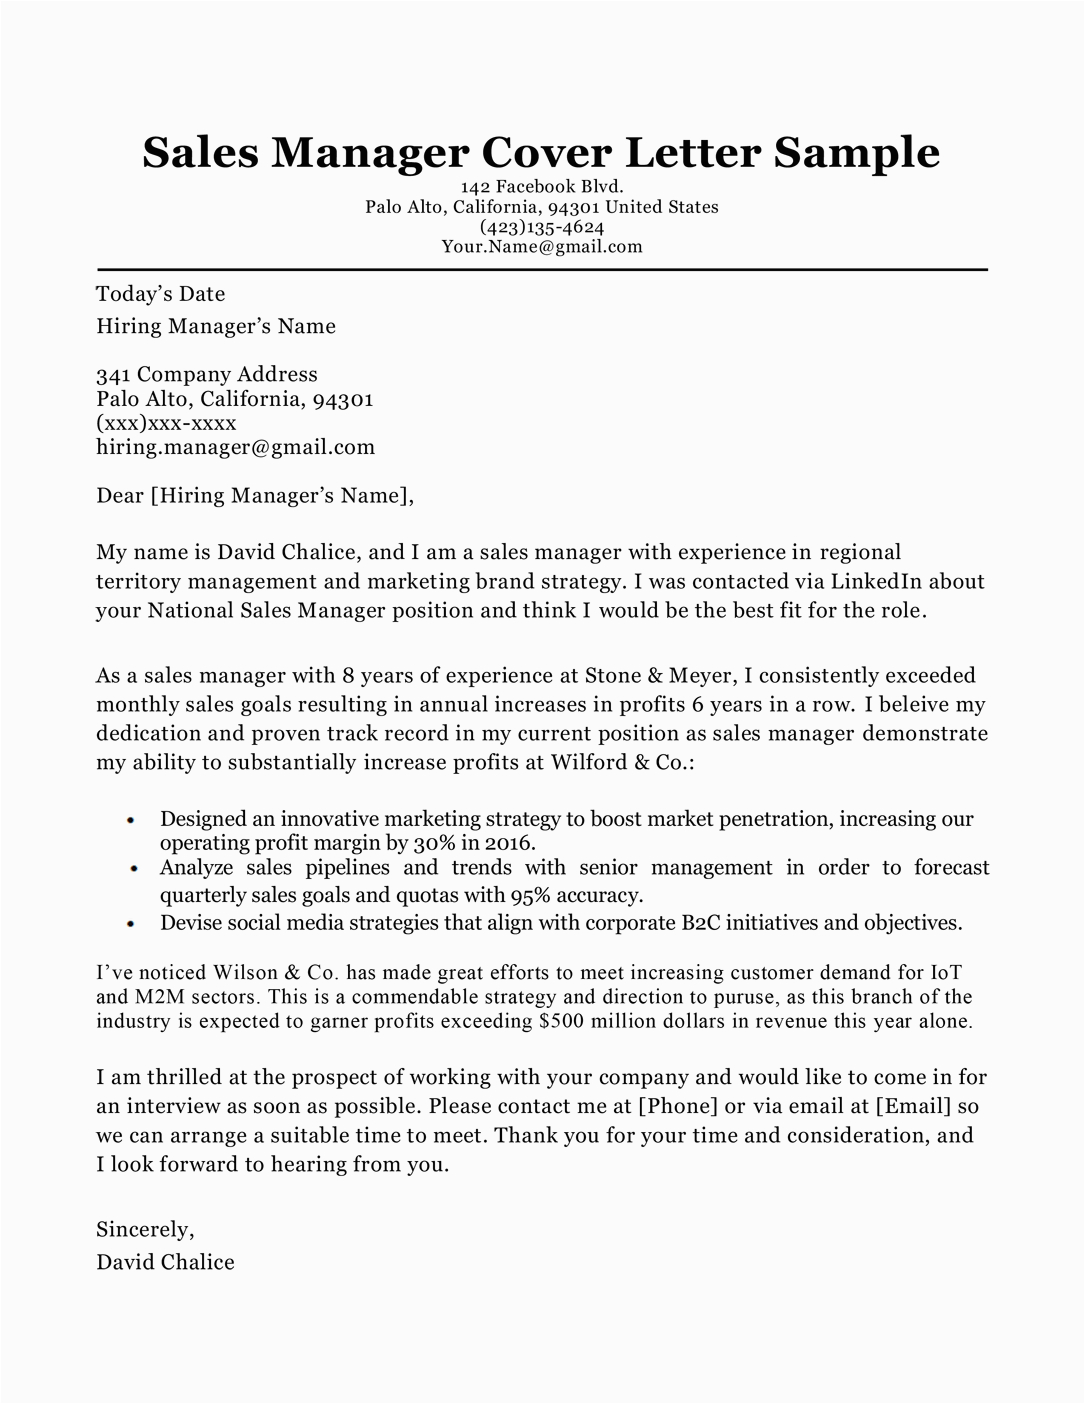 Sample Sales Cover Letters for Resumes Sales Manager Cover Letter Sample